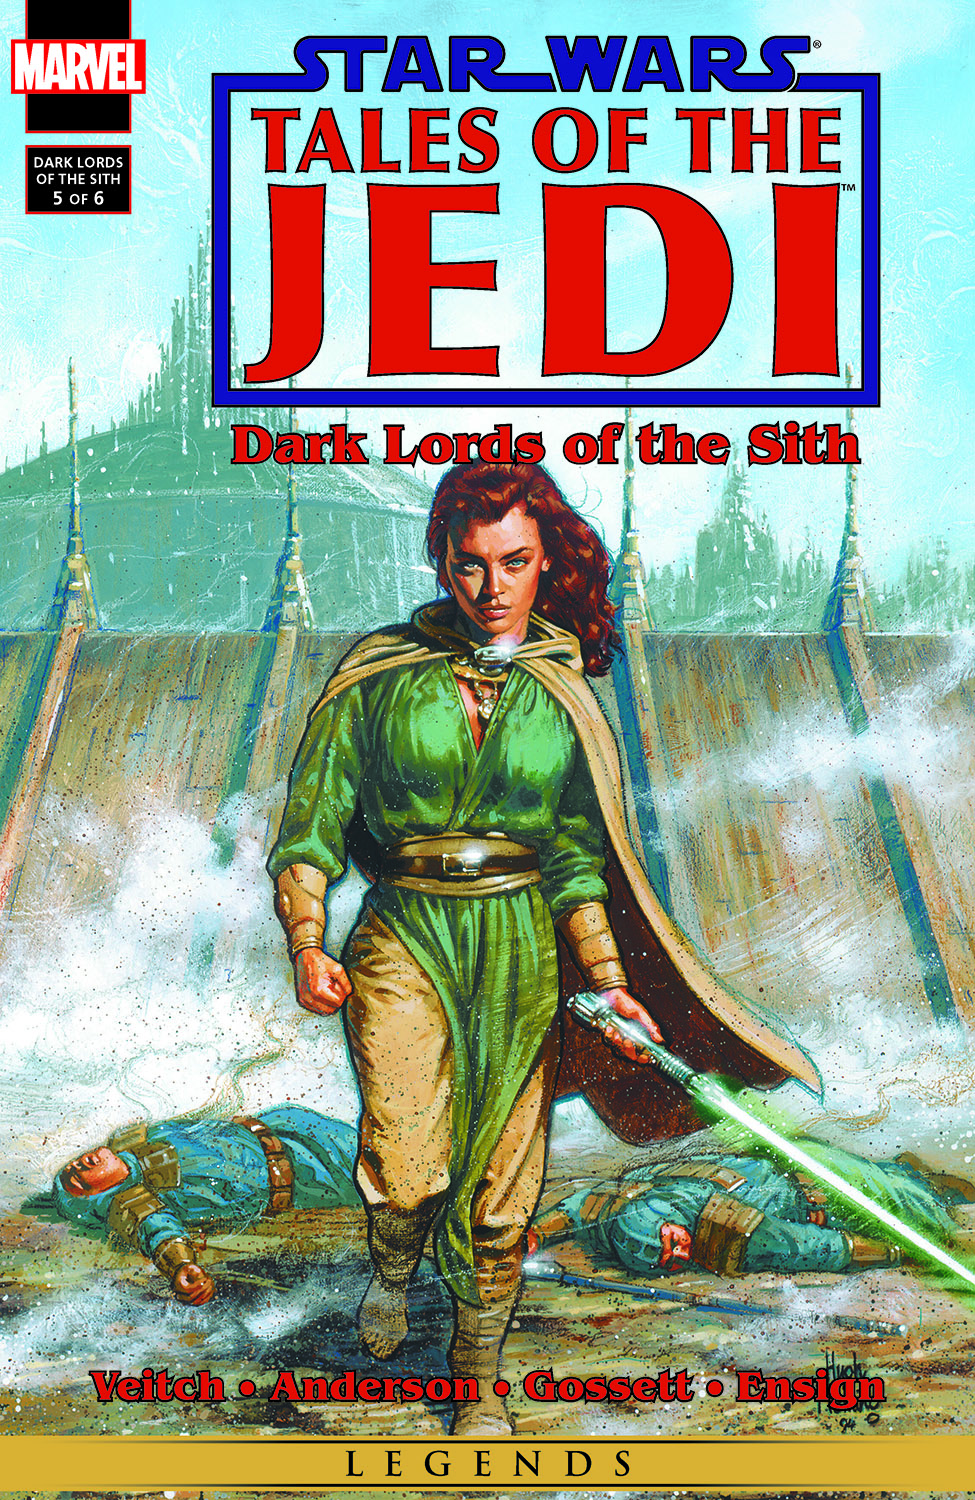 Star Wars: Tales of the Jedi - Dark Lords of the Sith (1994) #5